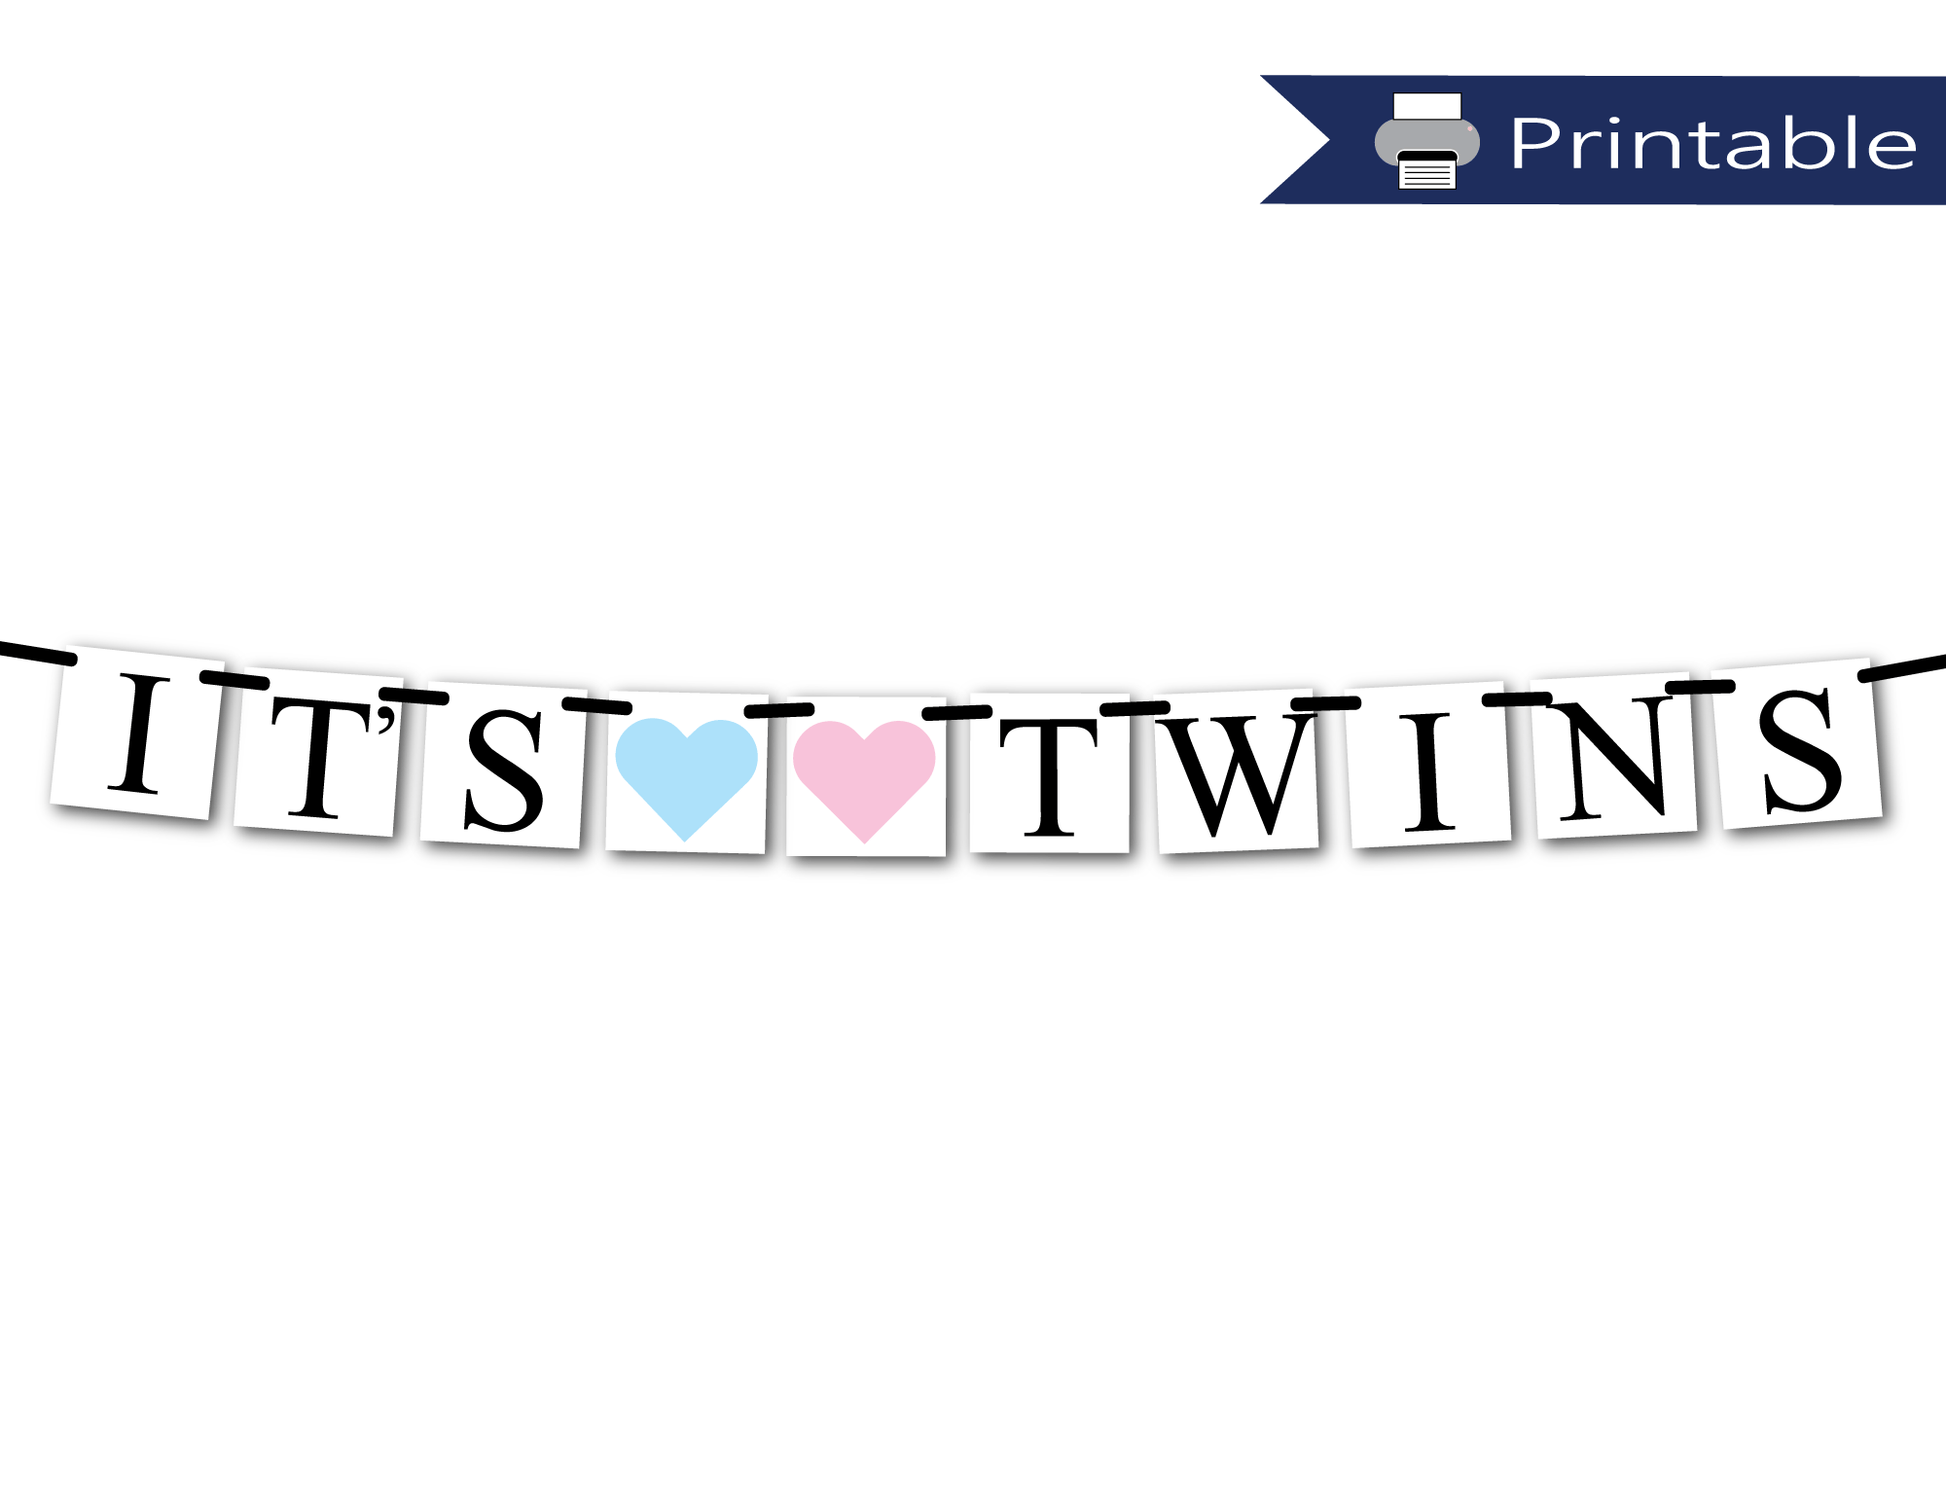 boy and girl twins baby shower decor - Celebrating Together